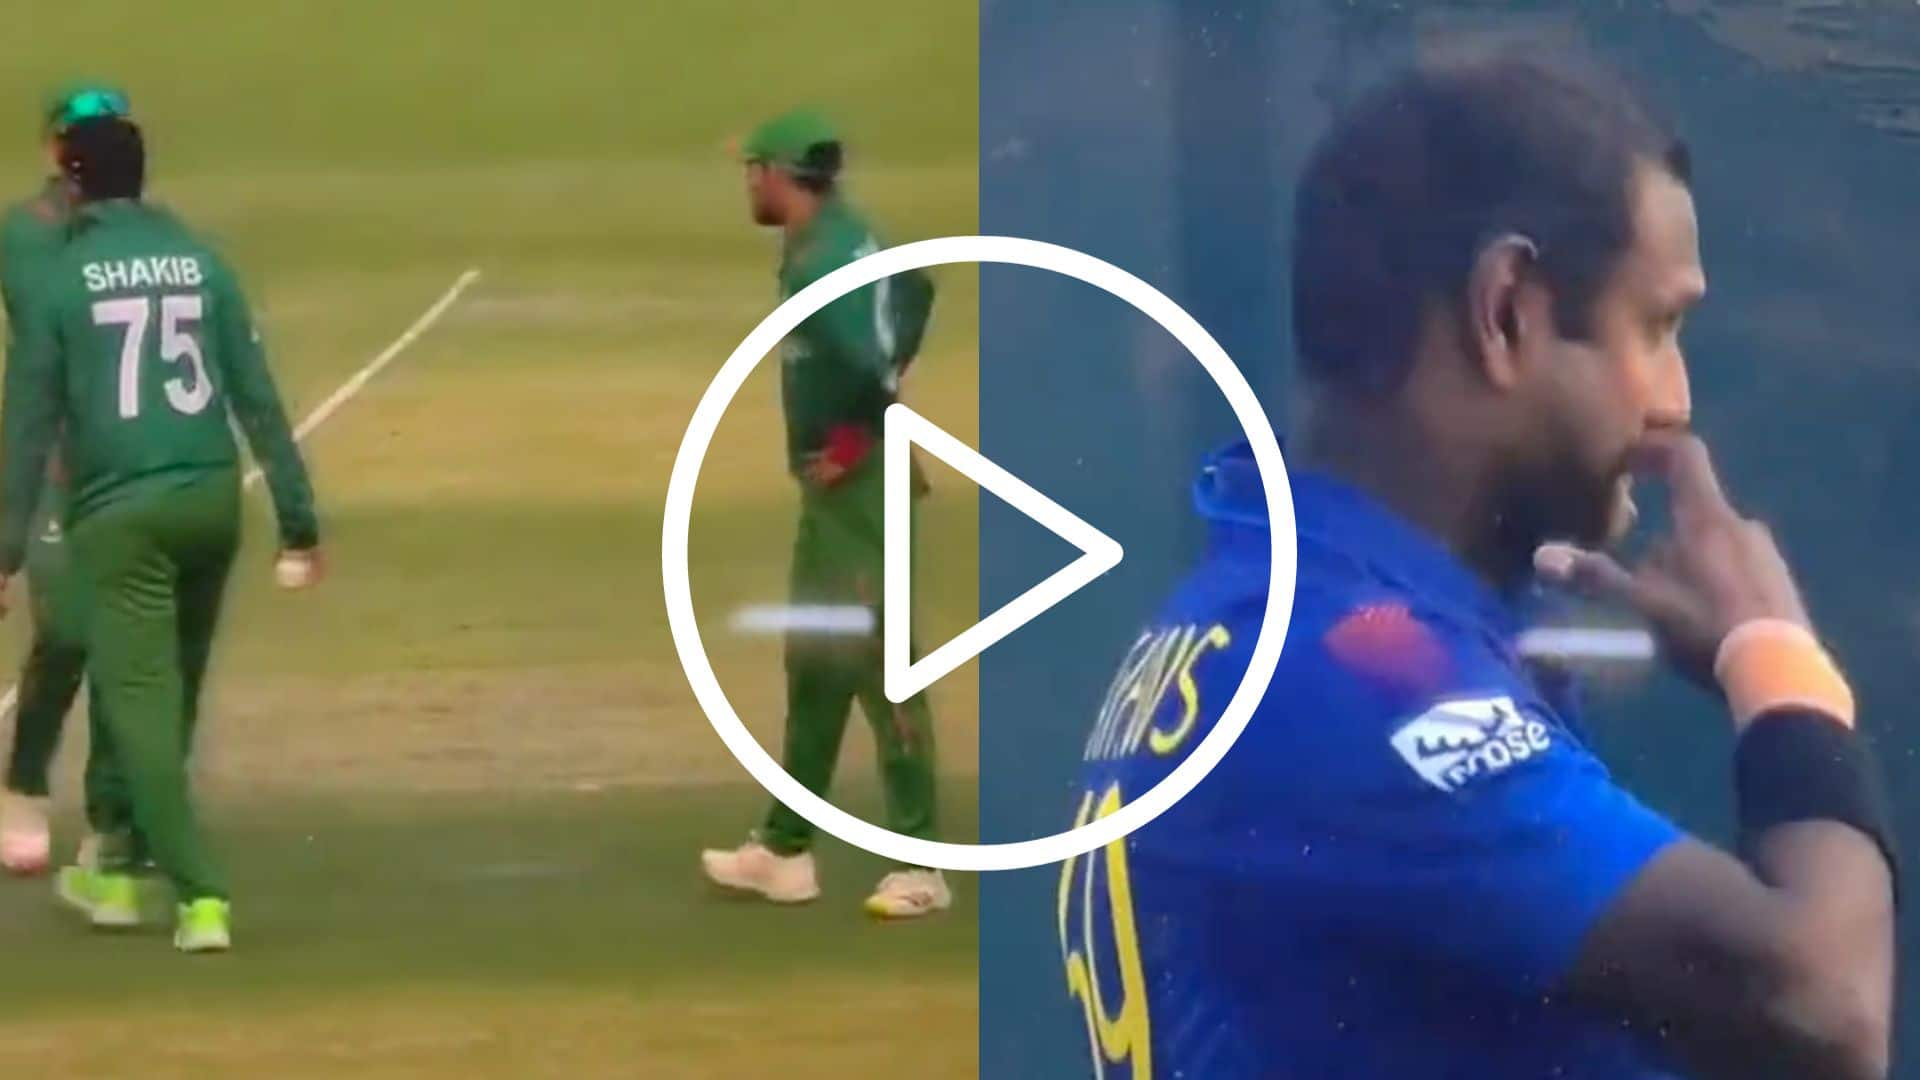 [Watch] Angelo Mathews ‘Timed Out’ As Shakib Al Hasan Pulls Off A ‘Masterstroke’